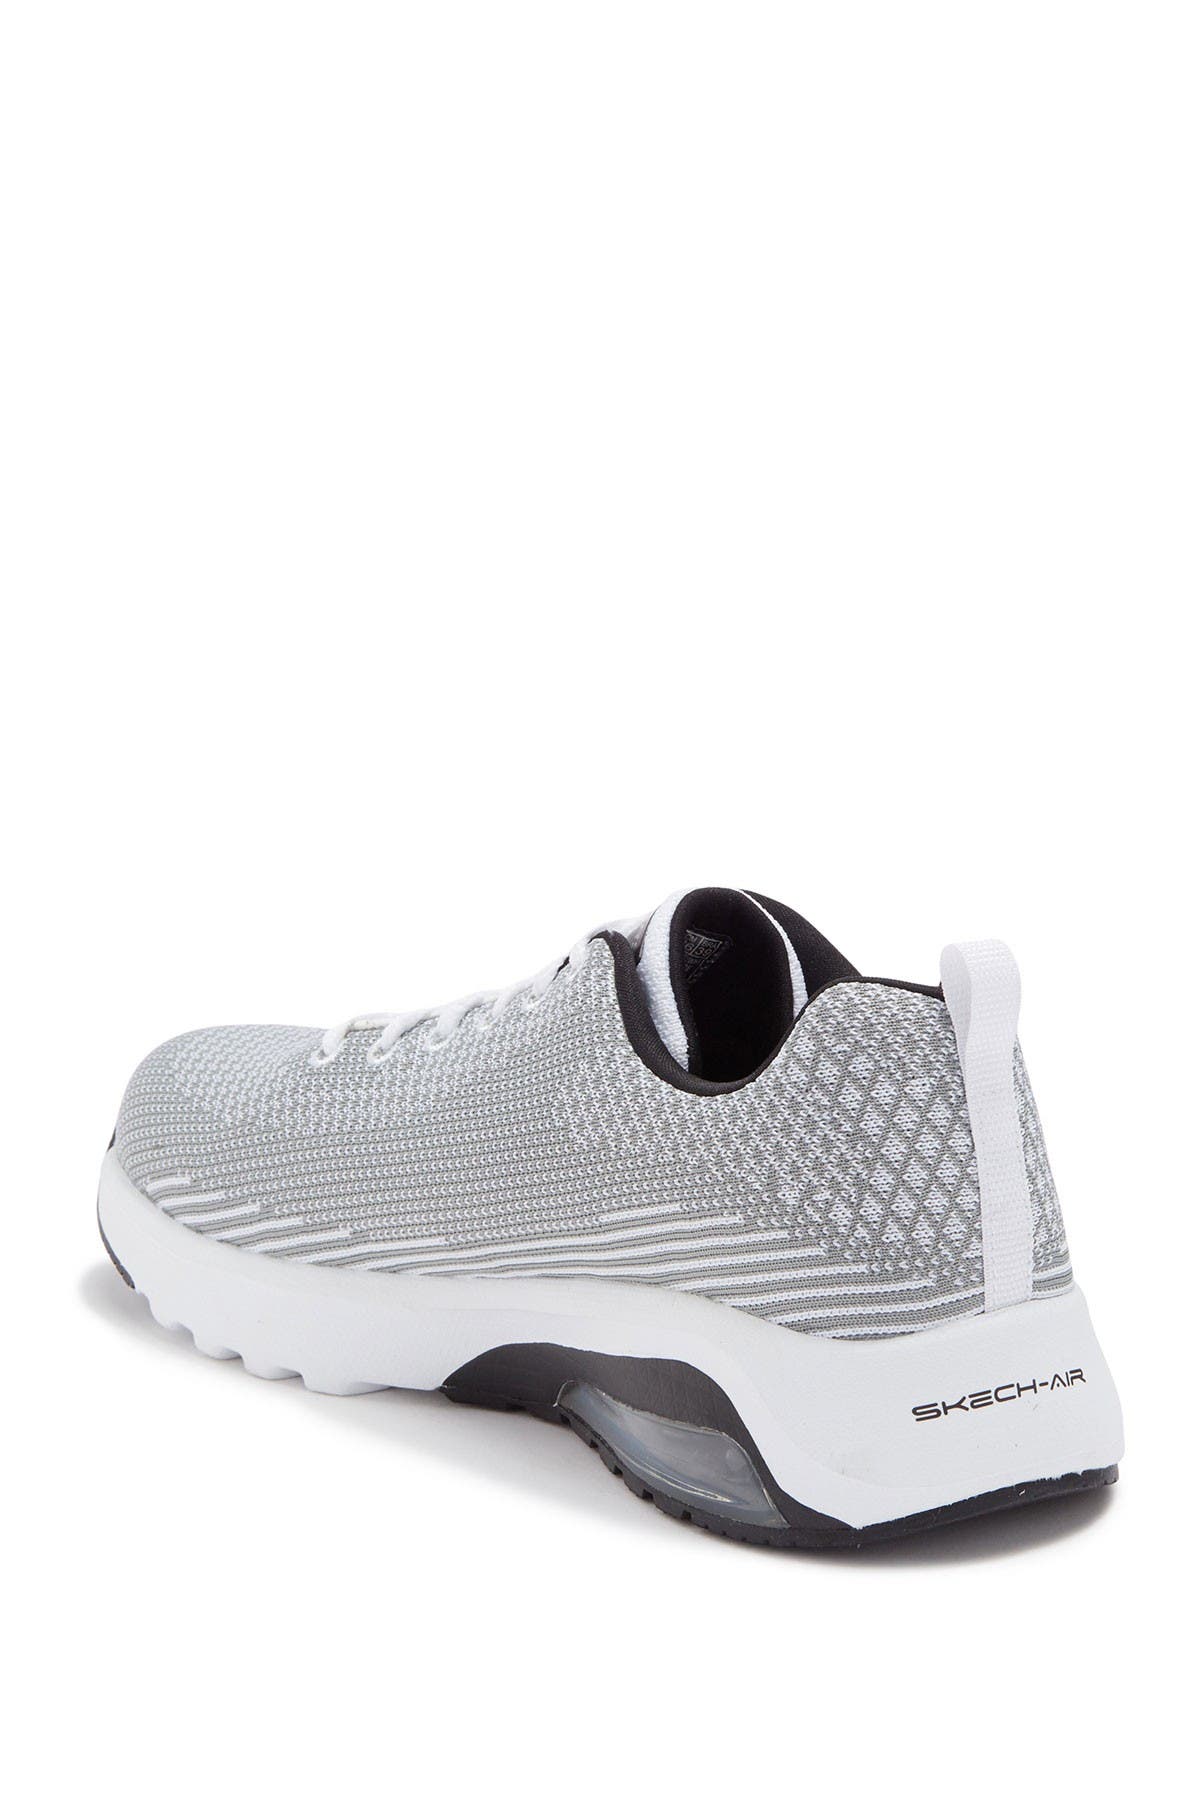 skechers skech air extreme